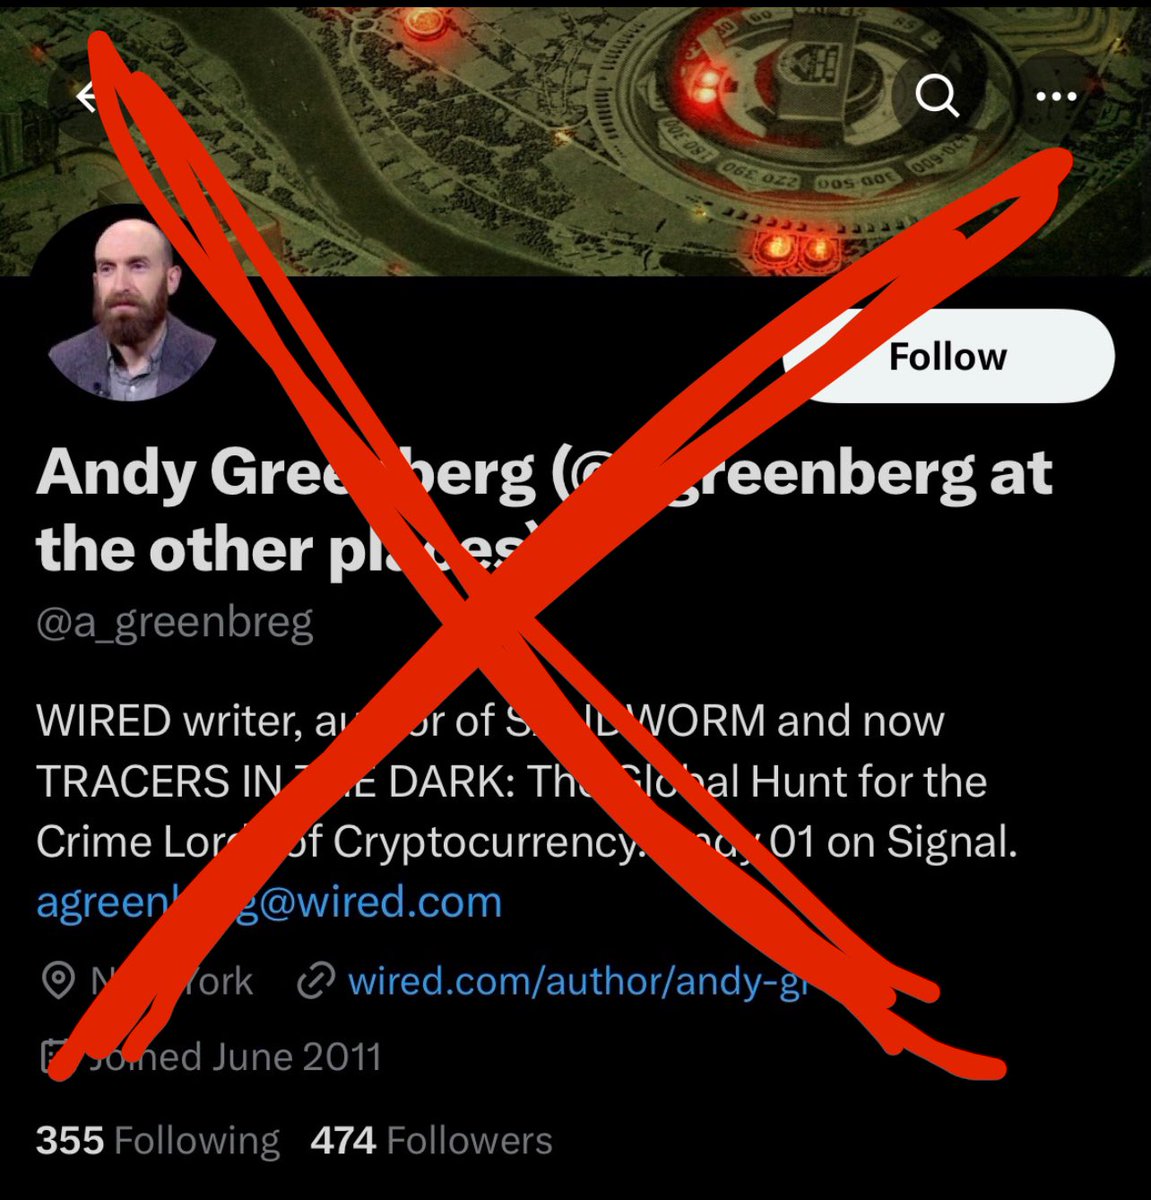 This fake account has been impersonating me and gaining followers: @a_greenbreg. Please don’t be fooled. Also please do me a favor and report it. (I reported to X days ago, still no action taken.)